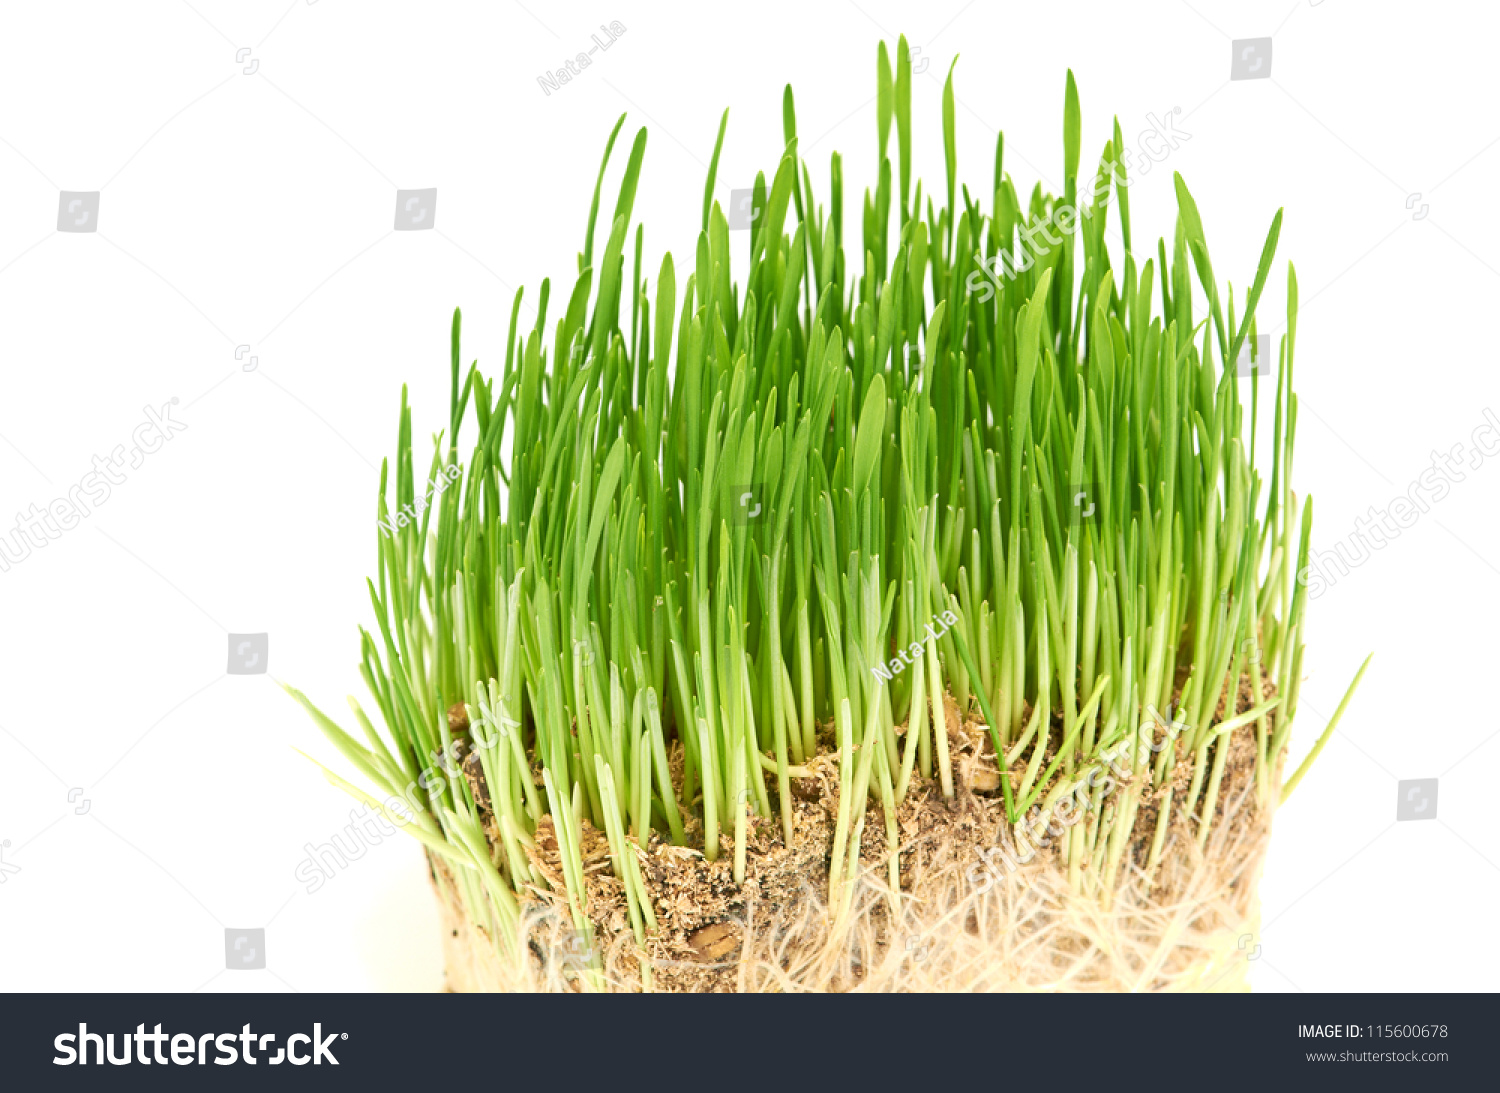 Green grass showing roots #115600678